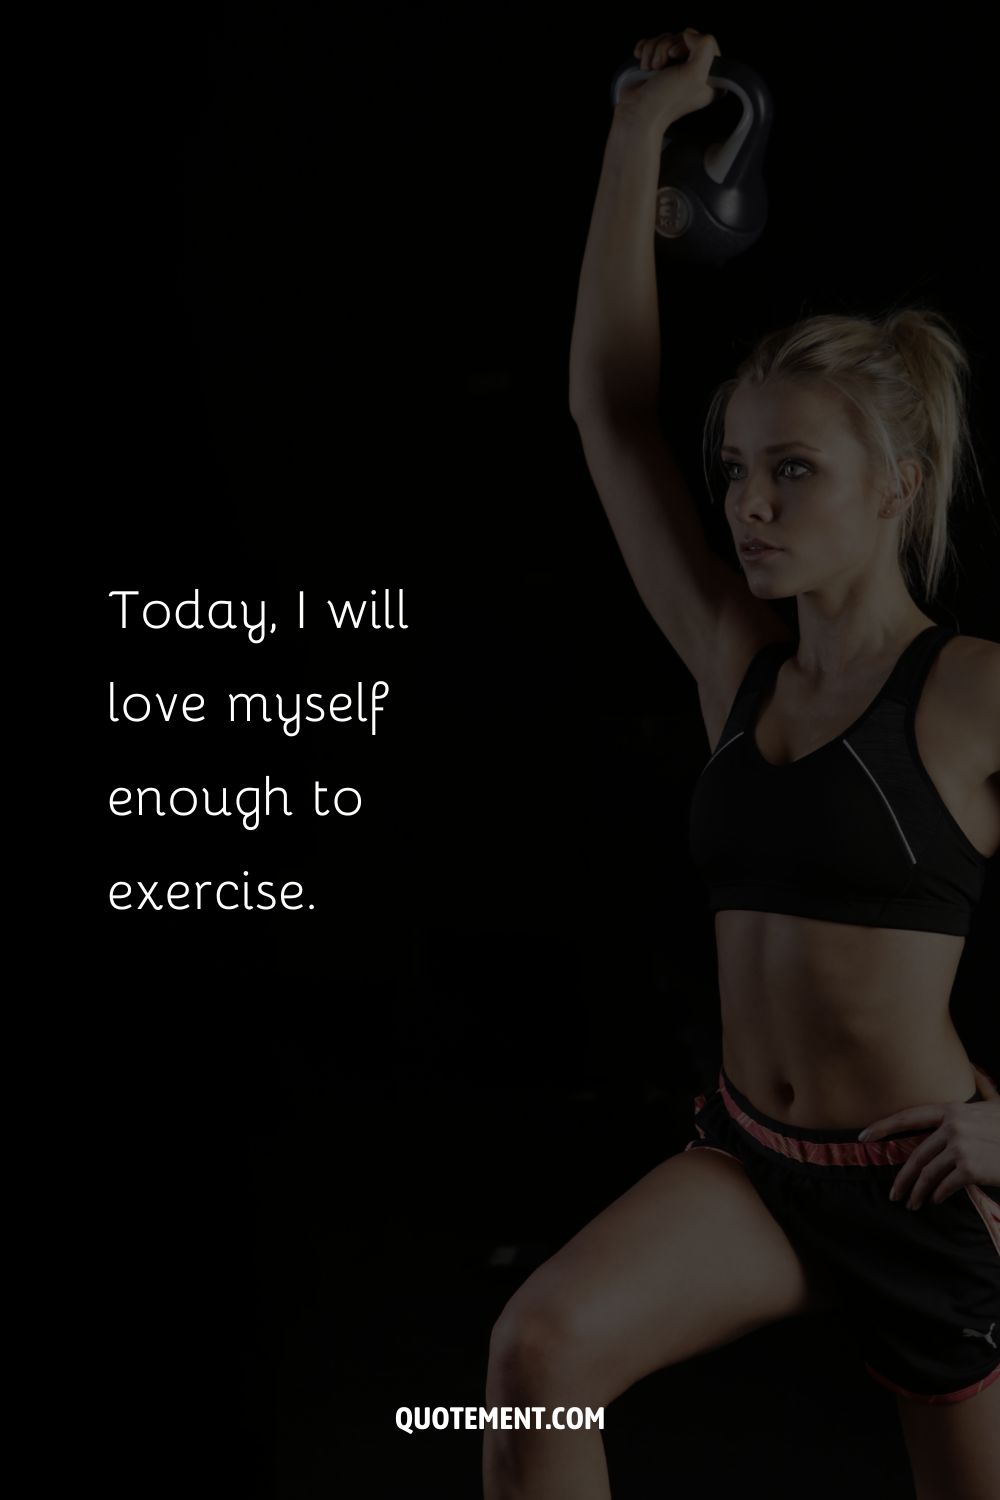 Today, I will love myself enough to exercise